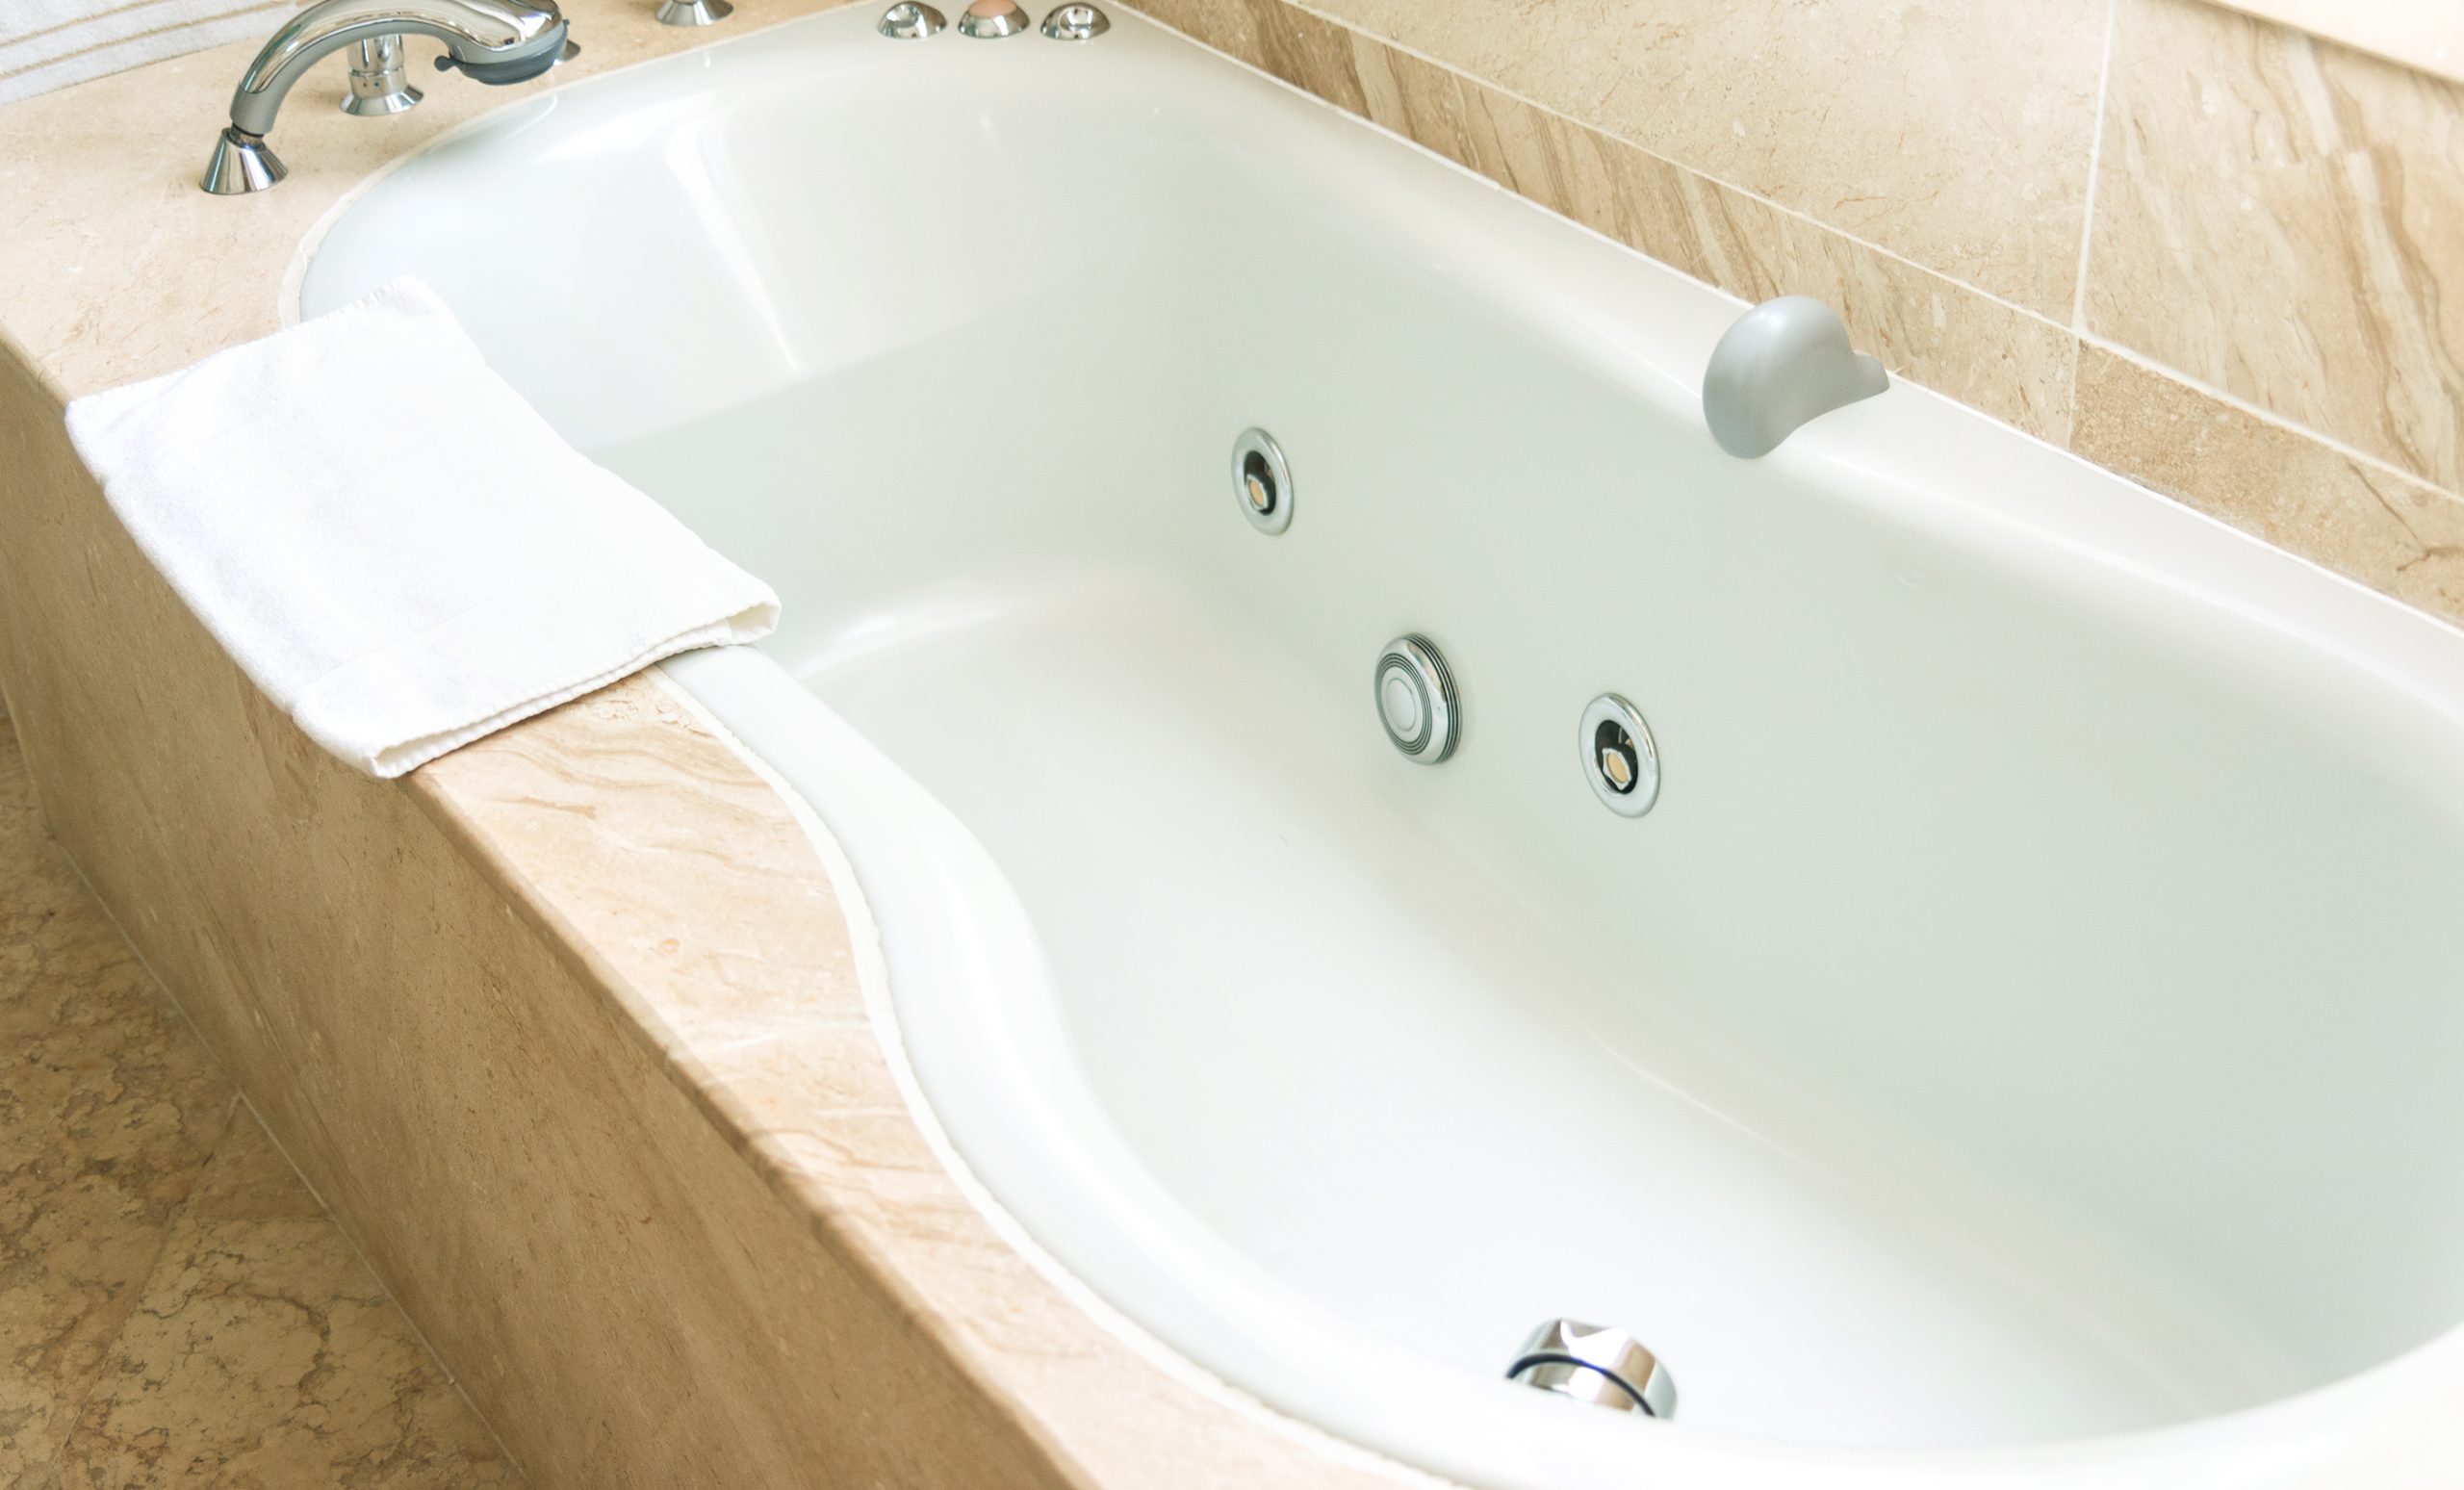 Spa Tub Refinishing: Can You Refinish a Jetted Tub? - Maryland Tub & Tile